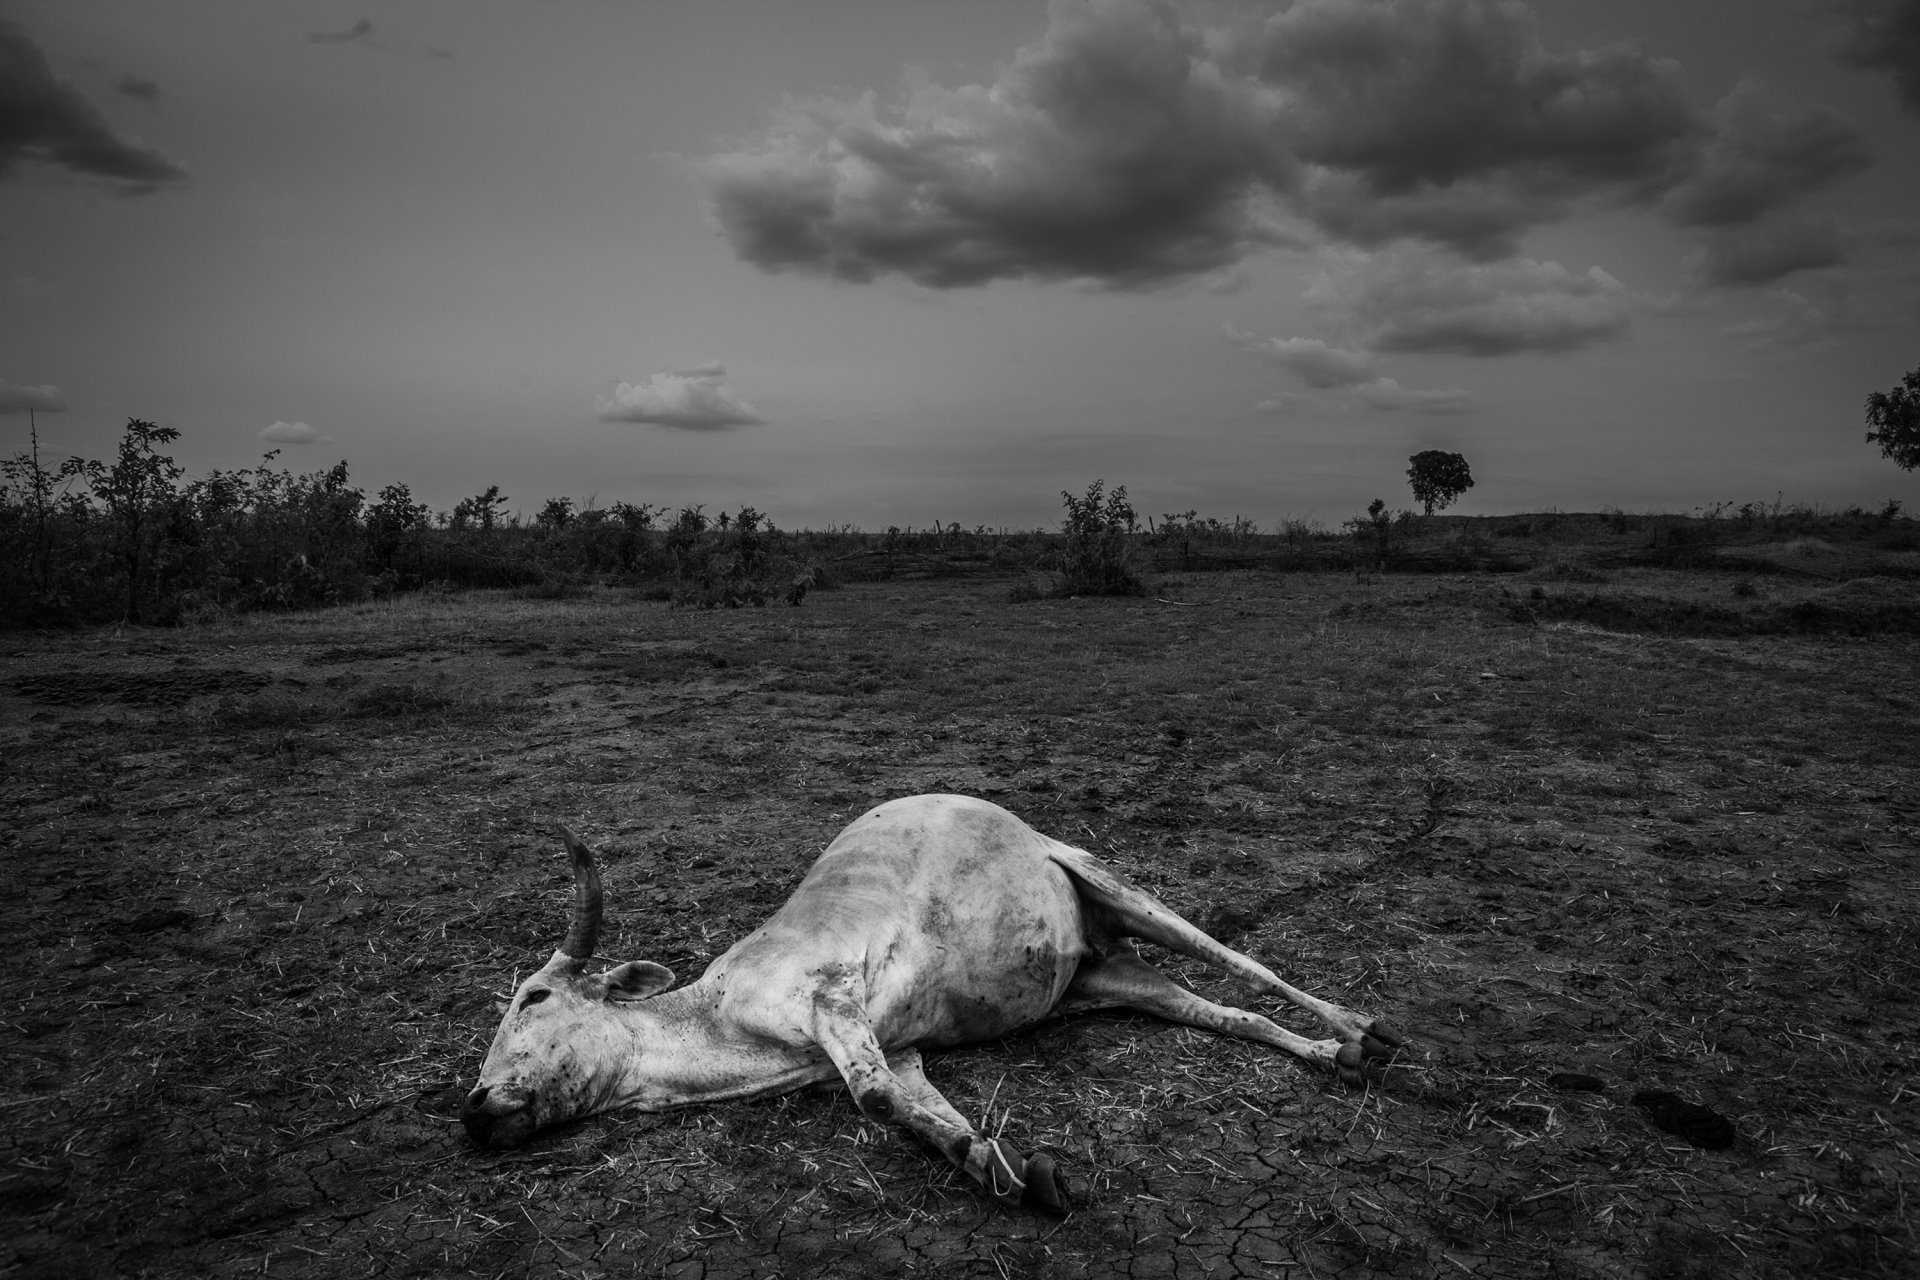 Livestock suspected of being killed by a tiger lies near the village of Navegaon, in Brahmapuri, India. At the time villagers reported one animal being killed a week. Attacks on humans were also rising.